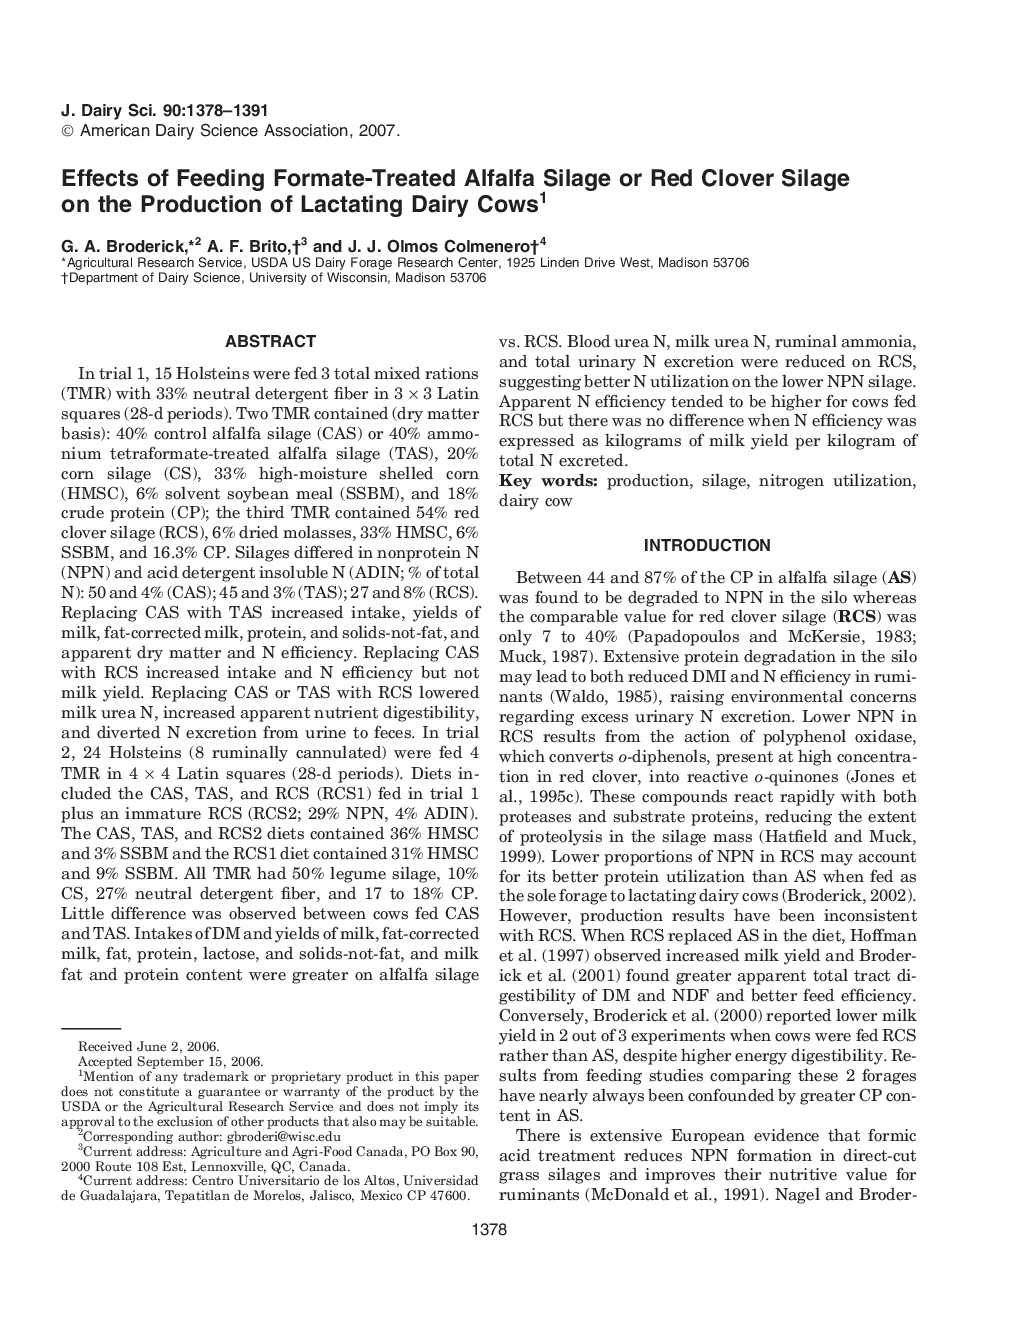 Effects of Feeding Formate-Treated Alfalfa Silage or Red Clover Silage on the Production of Lactating Dairy Cows1